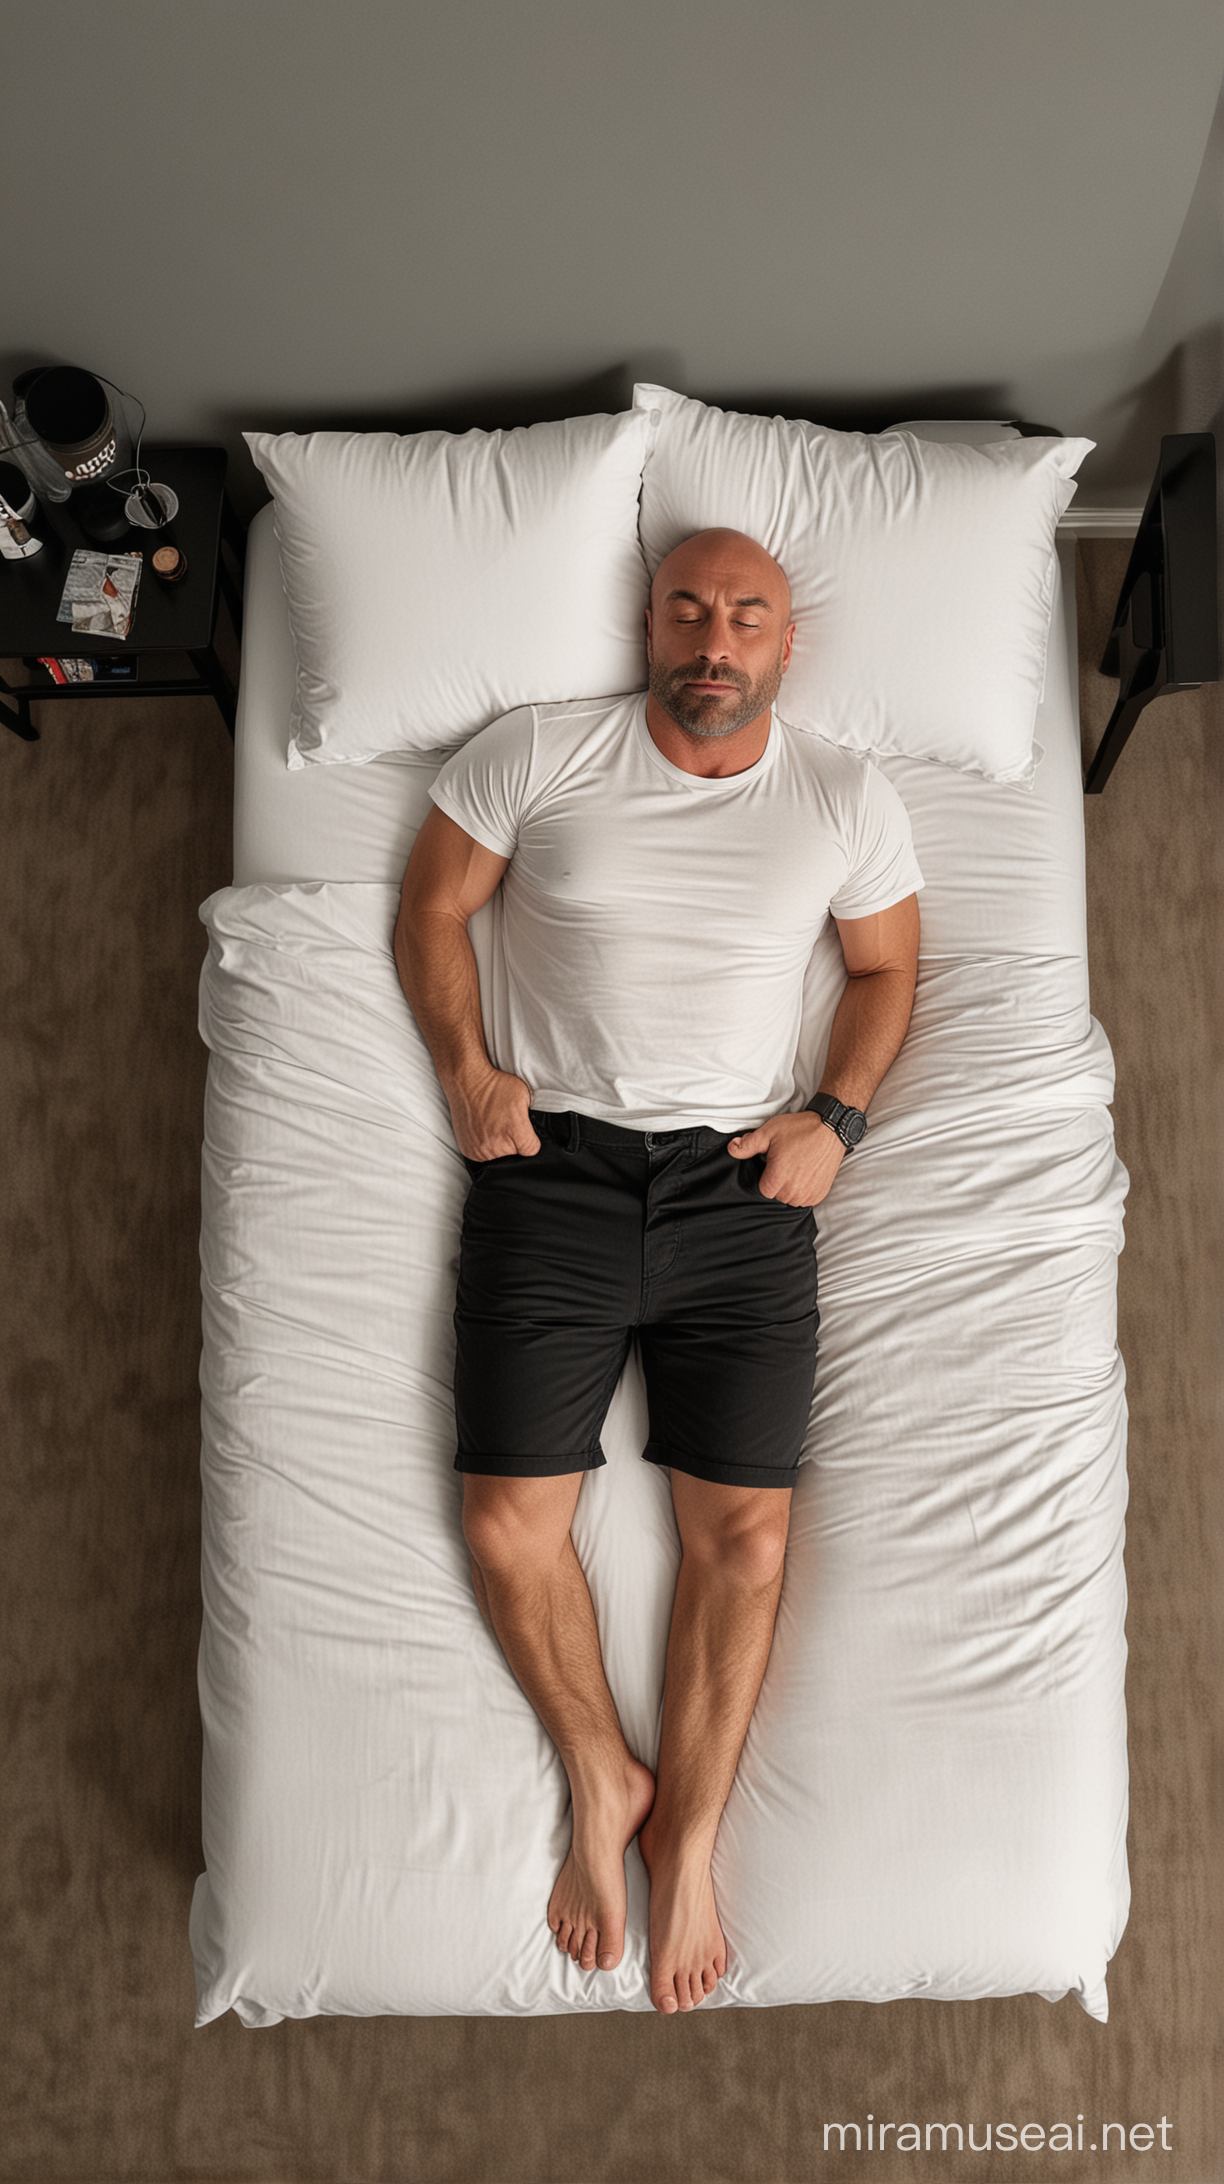 joe rogan sleeping on the right edge oaf a bed , top view